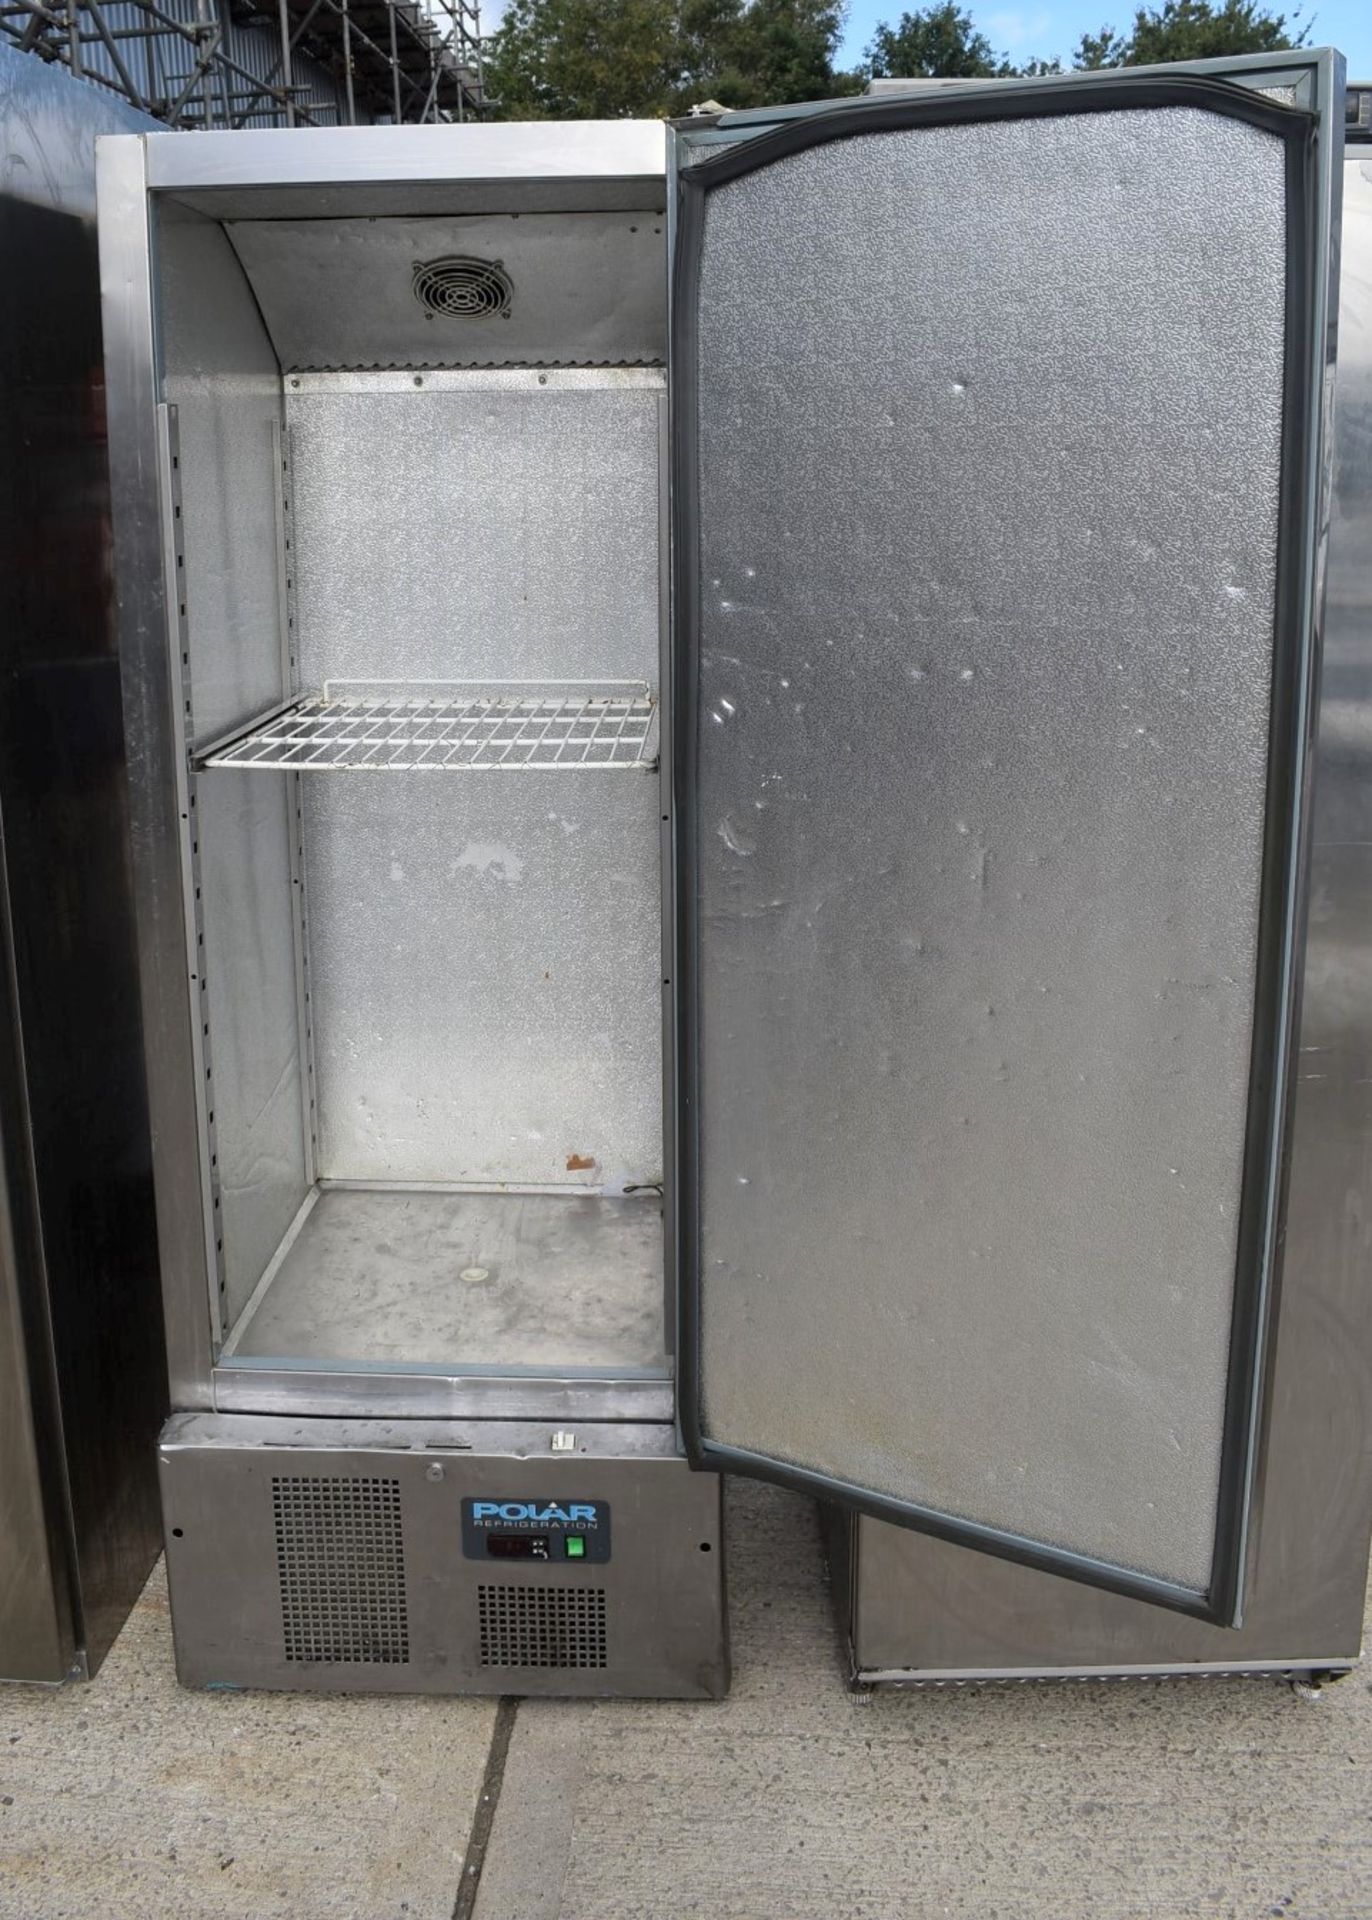 1 x Polar G590 Upright Commercial Fridge - Size: H188 x W65 x D70 cms - Recently Removed From a Dark - Image 3 of 6